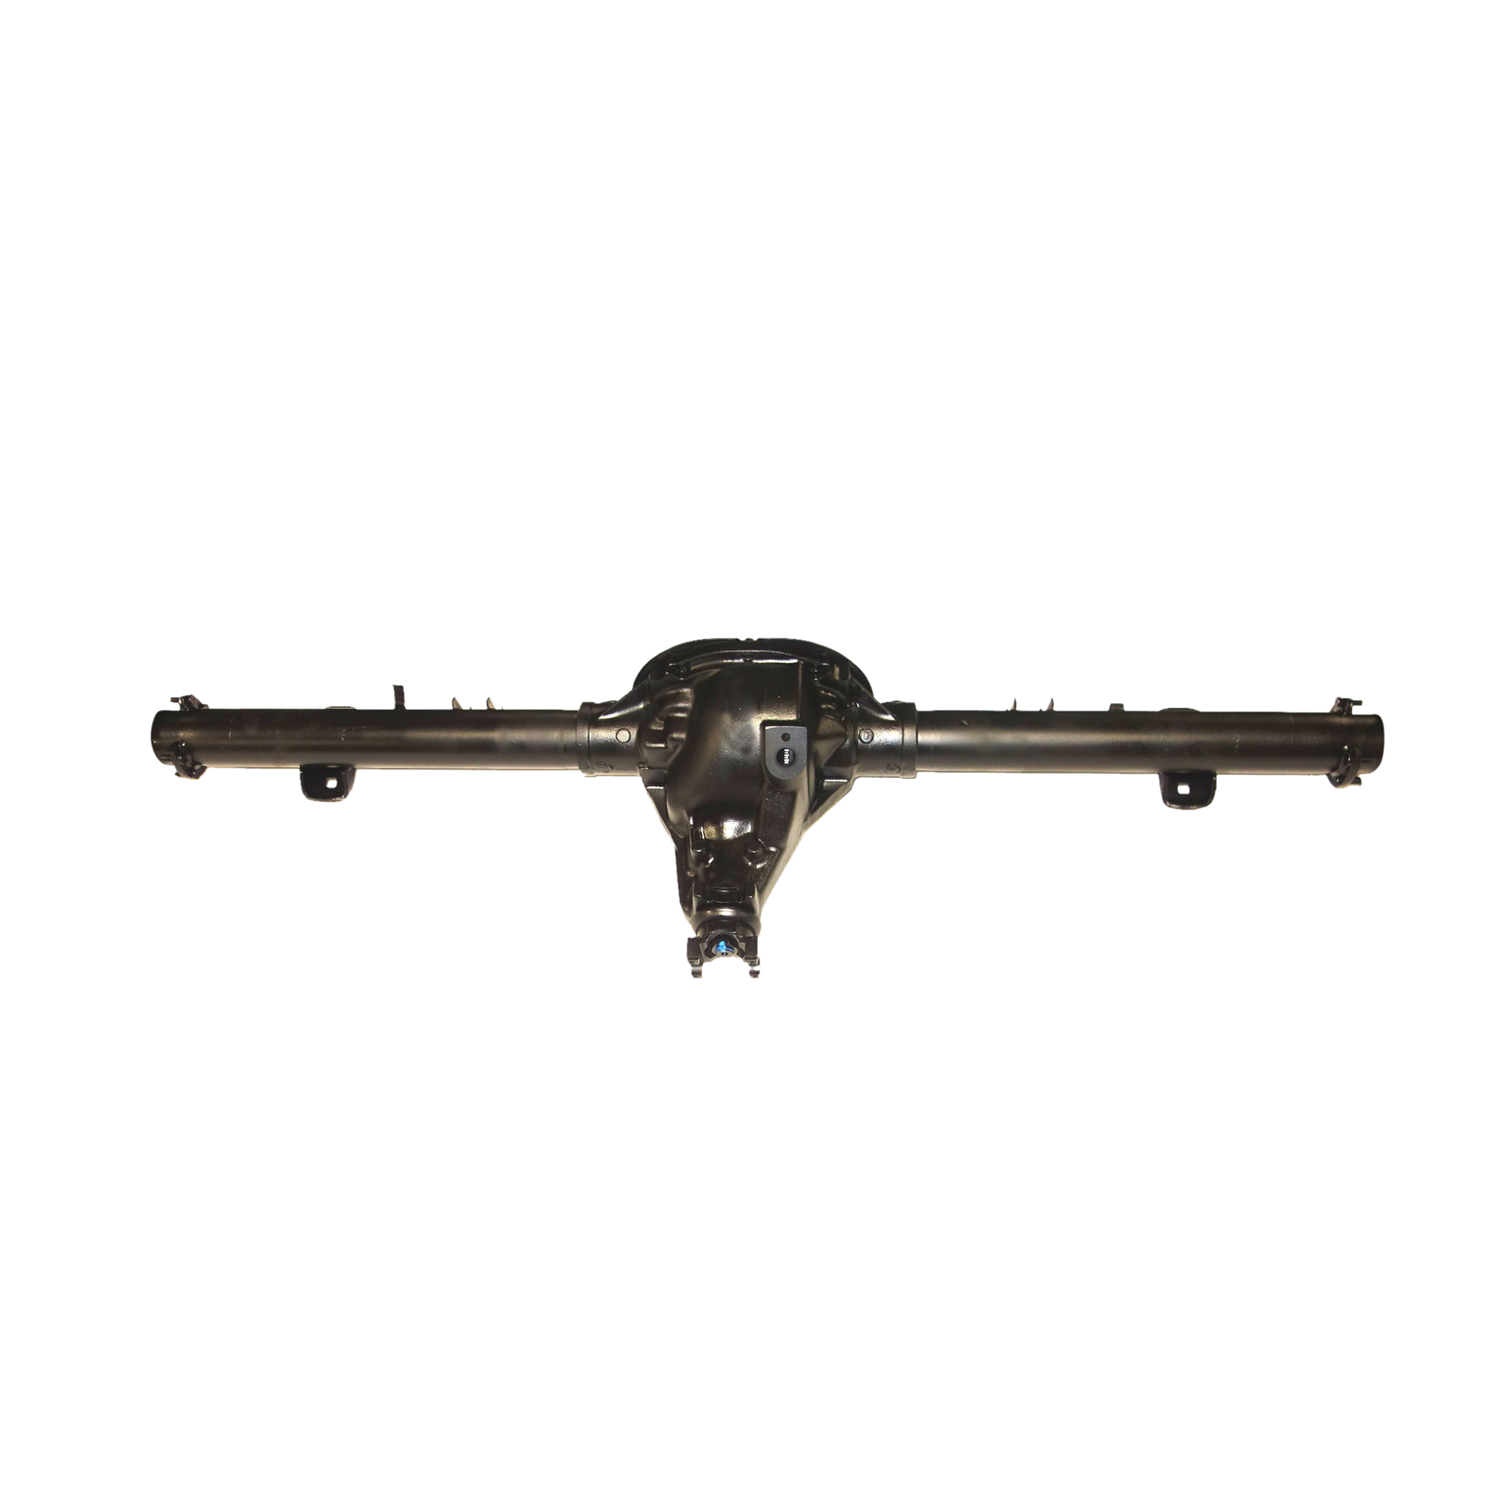 Remanufactured Axle Assy Chy 8.25" 89-93 1/2 Ton, D100, D150, 3.55 , 2wd, Posi LSD w/ ABS